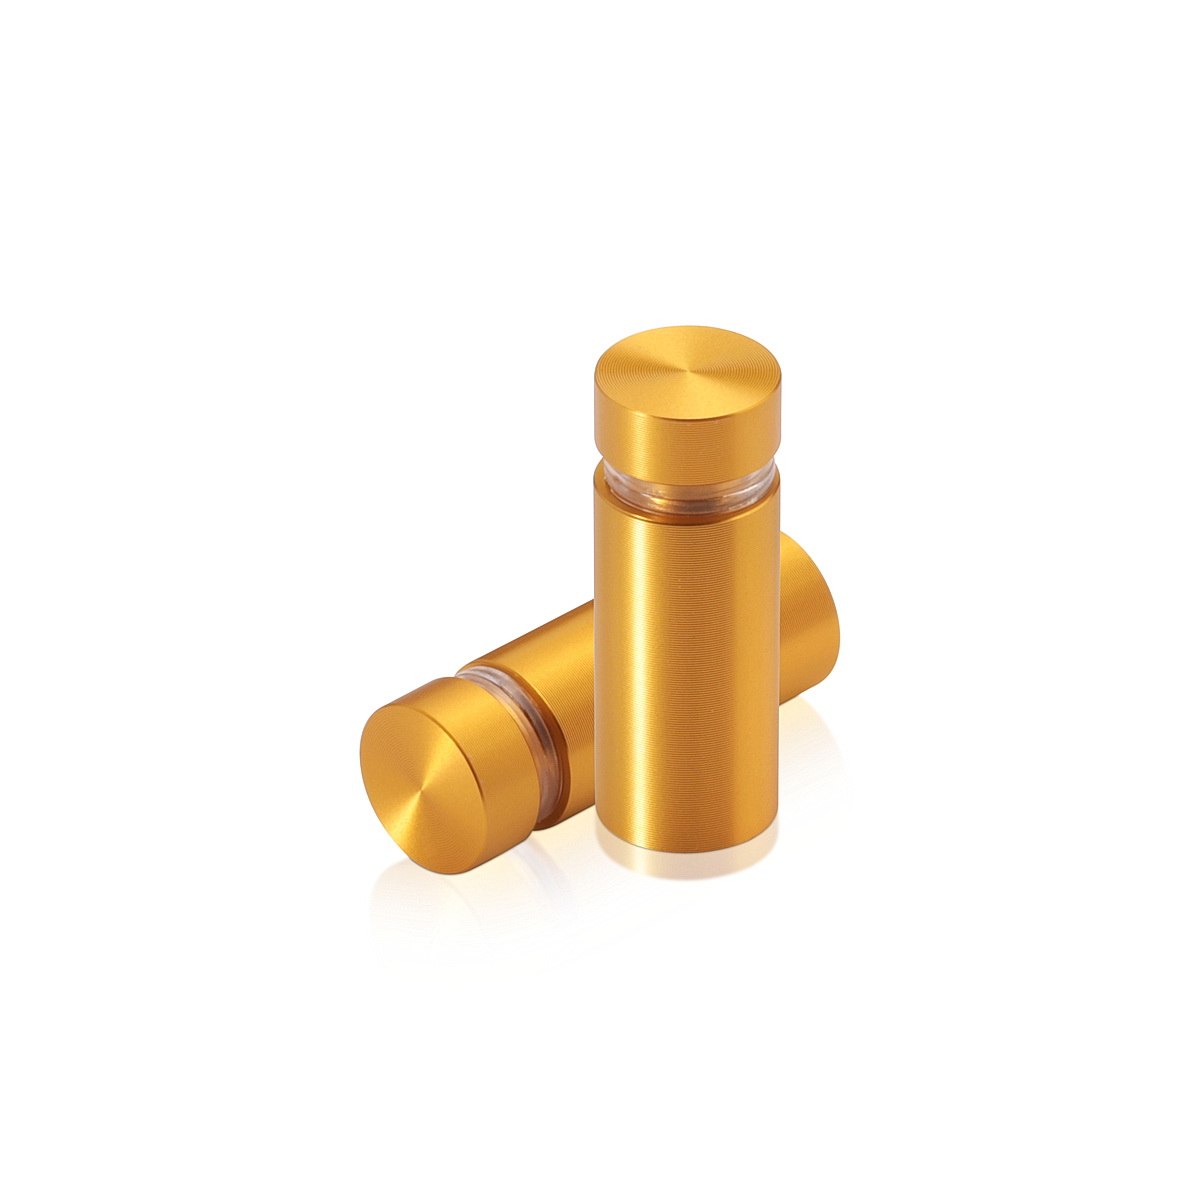 1/2'' Diameter X 1'' Barrel Length, Aluminum Flat Head Standoffs, Gold Anodized Finish Easy Fasten Standoff (For Inside / Outside use) Tamper Proof Standoff [Required Material Hole Size: 3/8'']